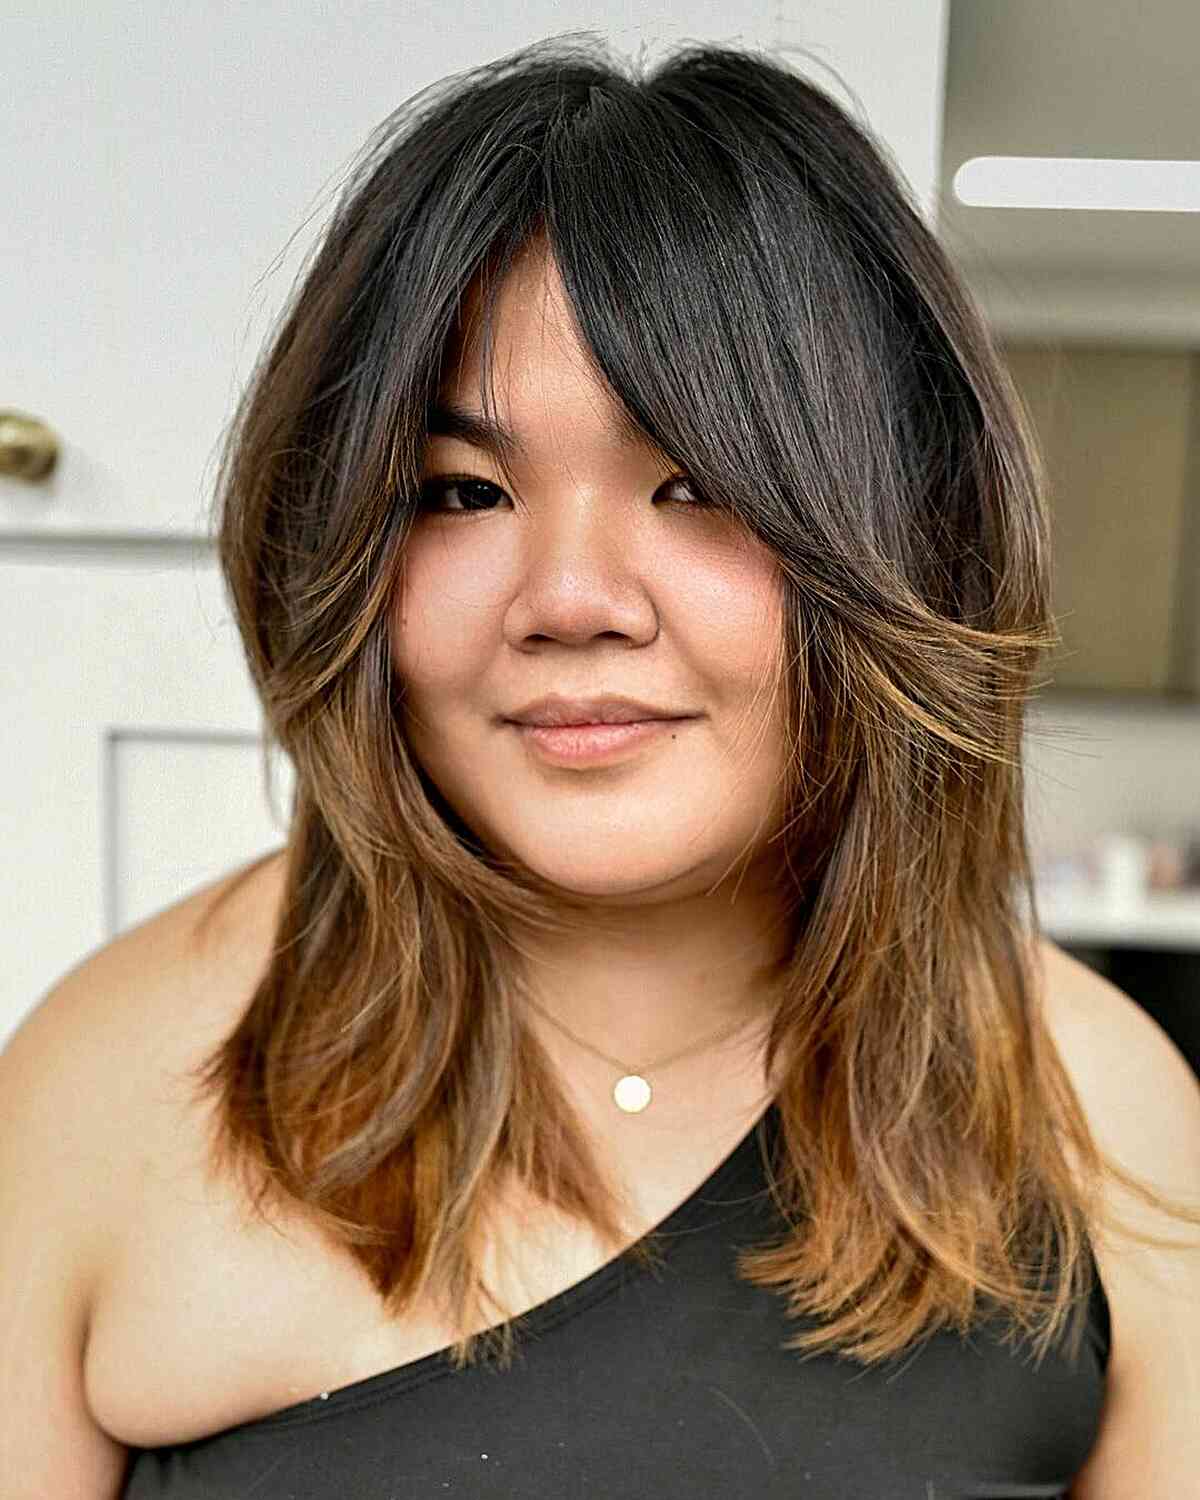 Extra Long Bangs on a Mid-Length Chop for Women with Double Chins